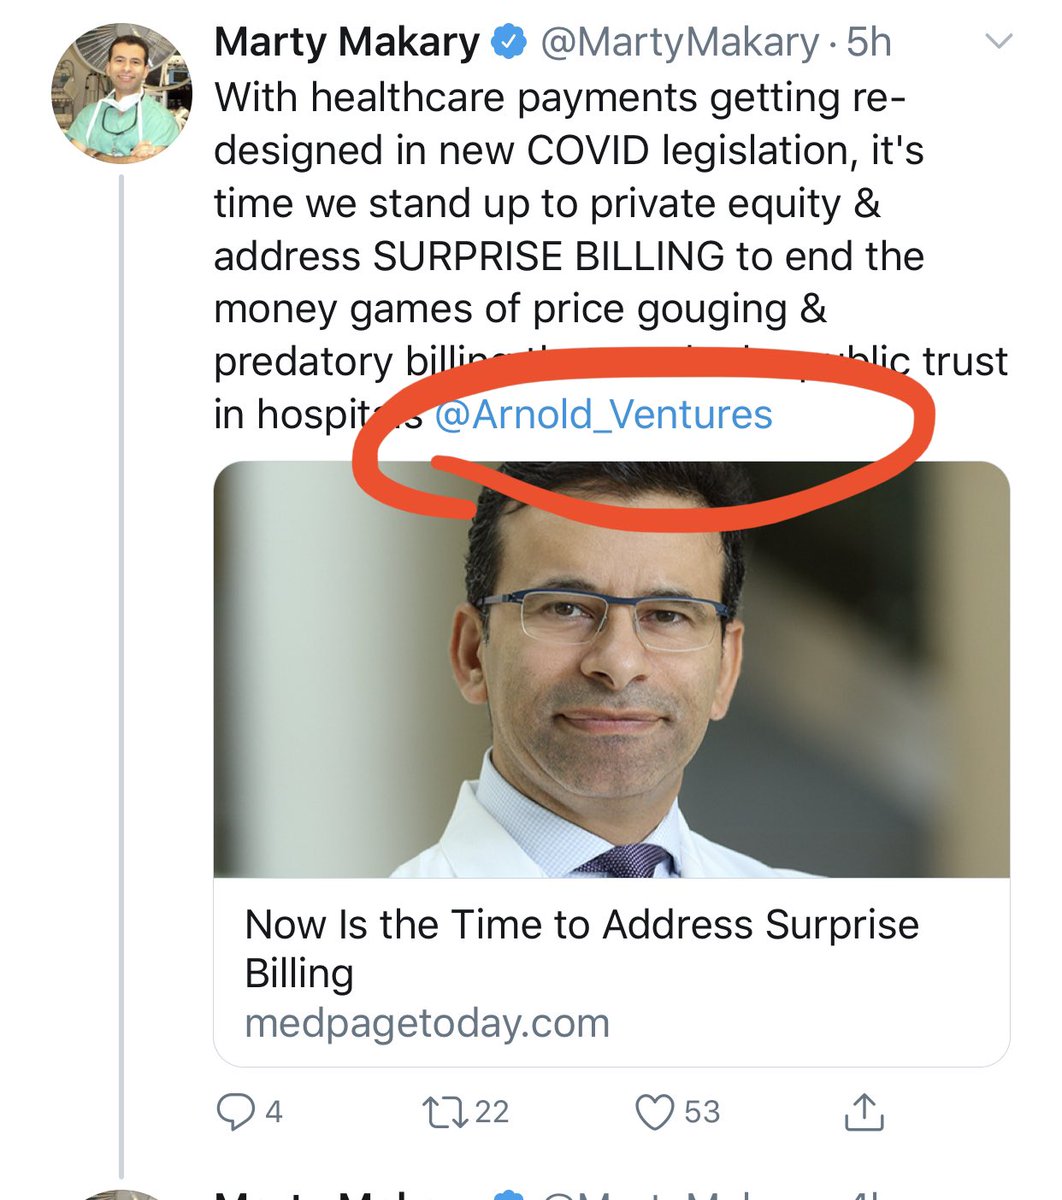 Looks like a nice pro patient article at first glance“Now is the Time to Address Surprise Billing”Not sure why he would tag billionaire John Arnold in this tweet too. Maybe Dr Makary would care to explain...Let’s dig a little deeper shall we?2/x